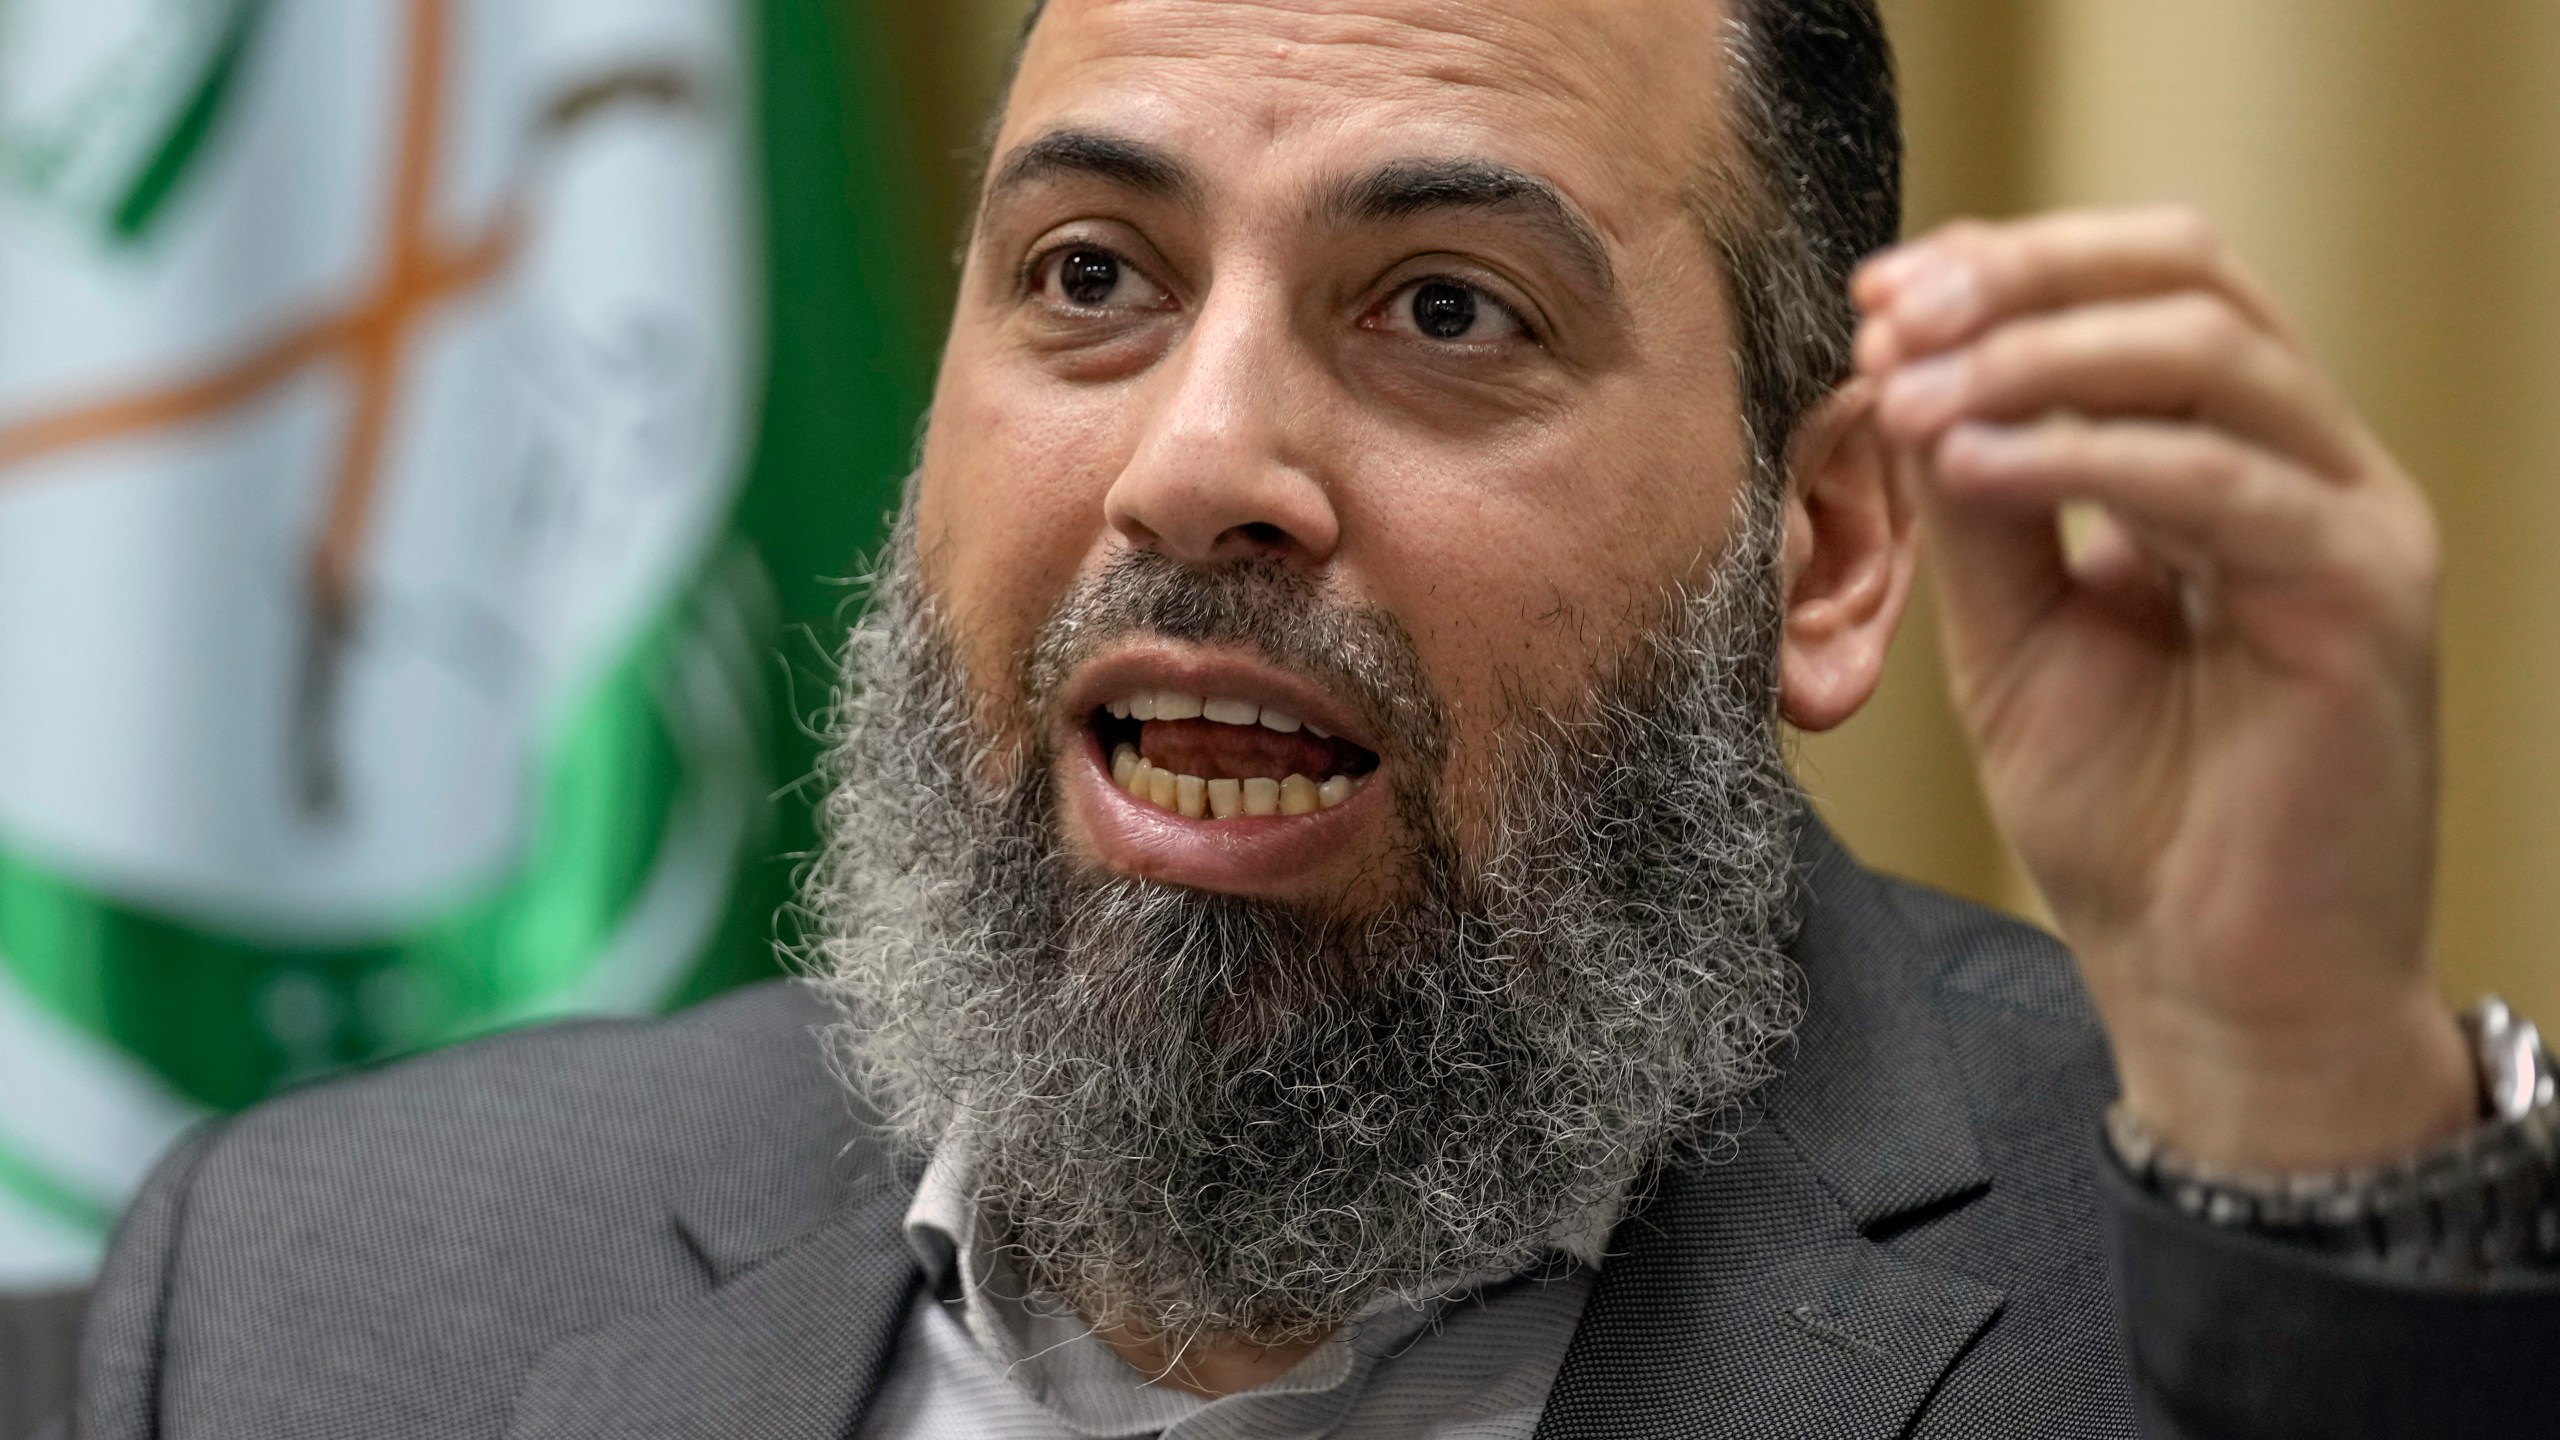 The Secretary-General of the Islamic Group Sheikh Mohammed Takkoush, speaks during an interview with The Associated Press in Beirut, Lebanon, Tuesday, March 26, 2024. Takkoush allied with Hamas and Hezbollah said Tuesday they are closely coordinating with both groups along the southern border with Israel where they have claimed responsibility for several attacks over the past months. (AP Photo/Bilal Hussein)